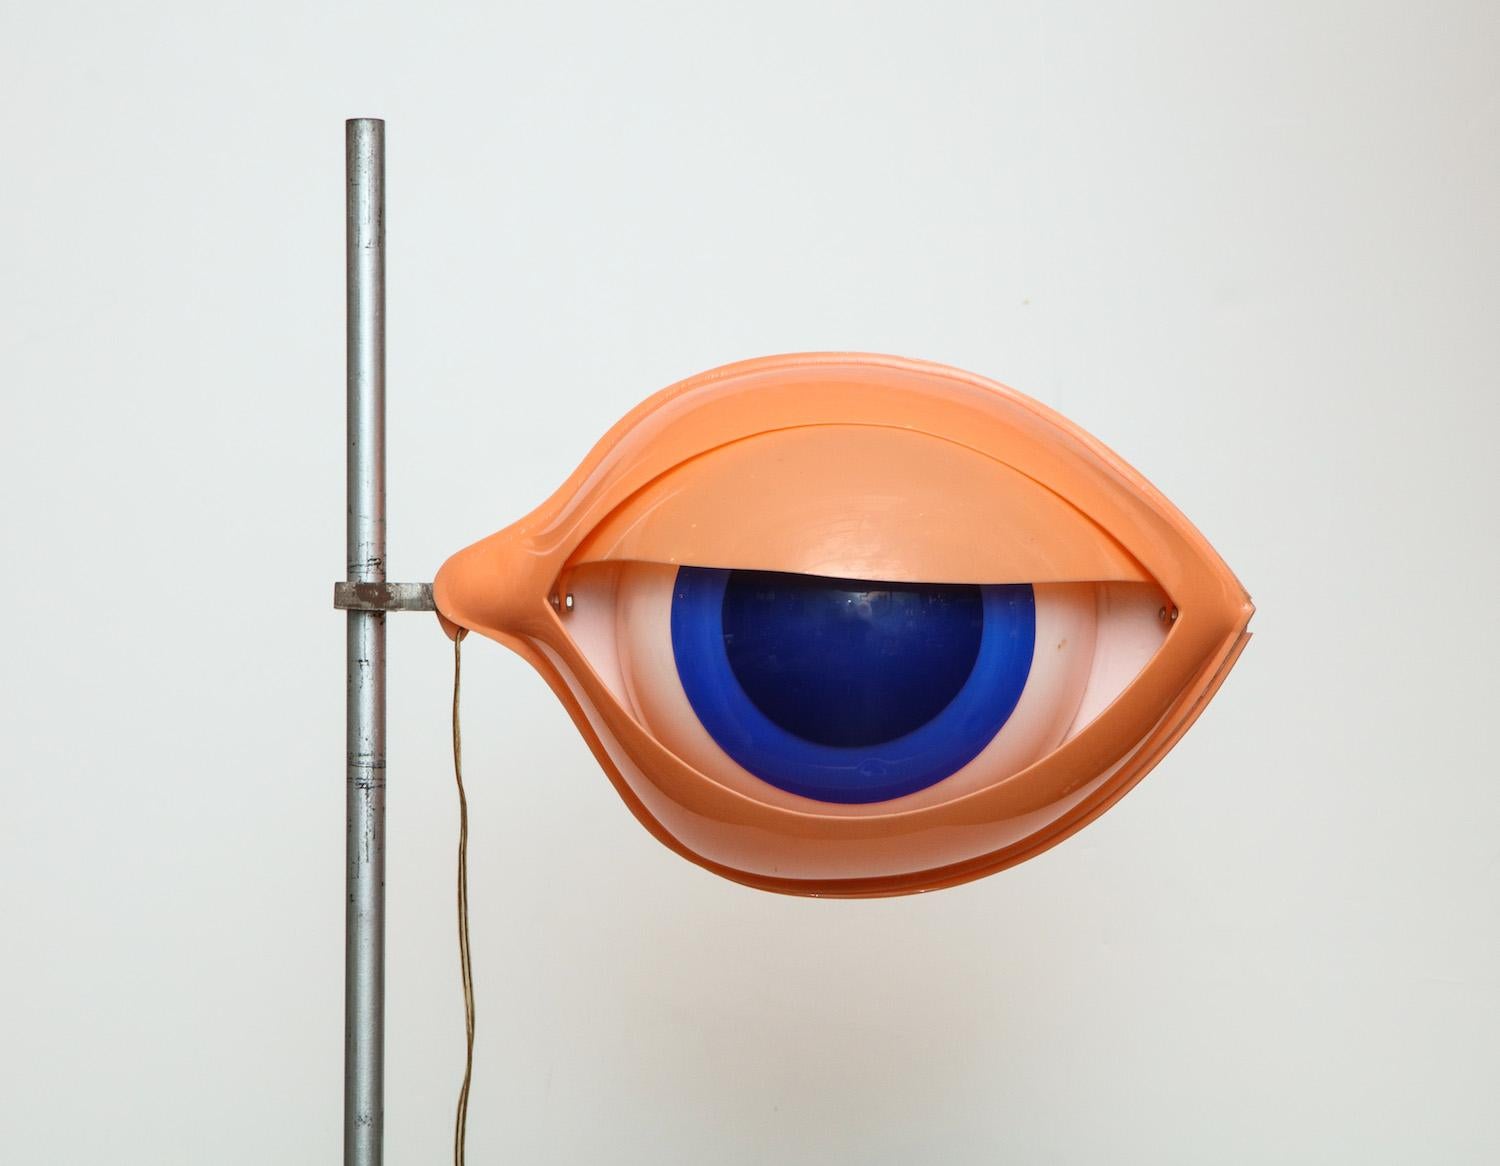 Iconic design by Nicola L. Heavy-gage plastic “eye” sculpture with interior illumination. Steel base and rod. Adjustable height.